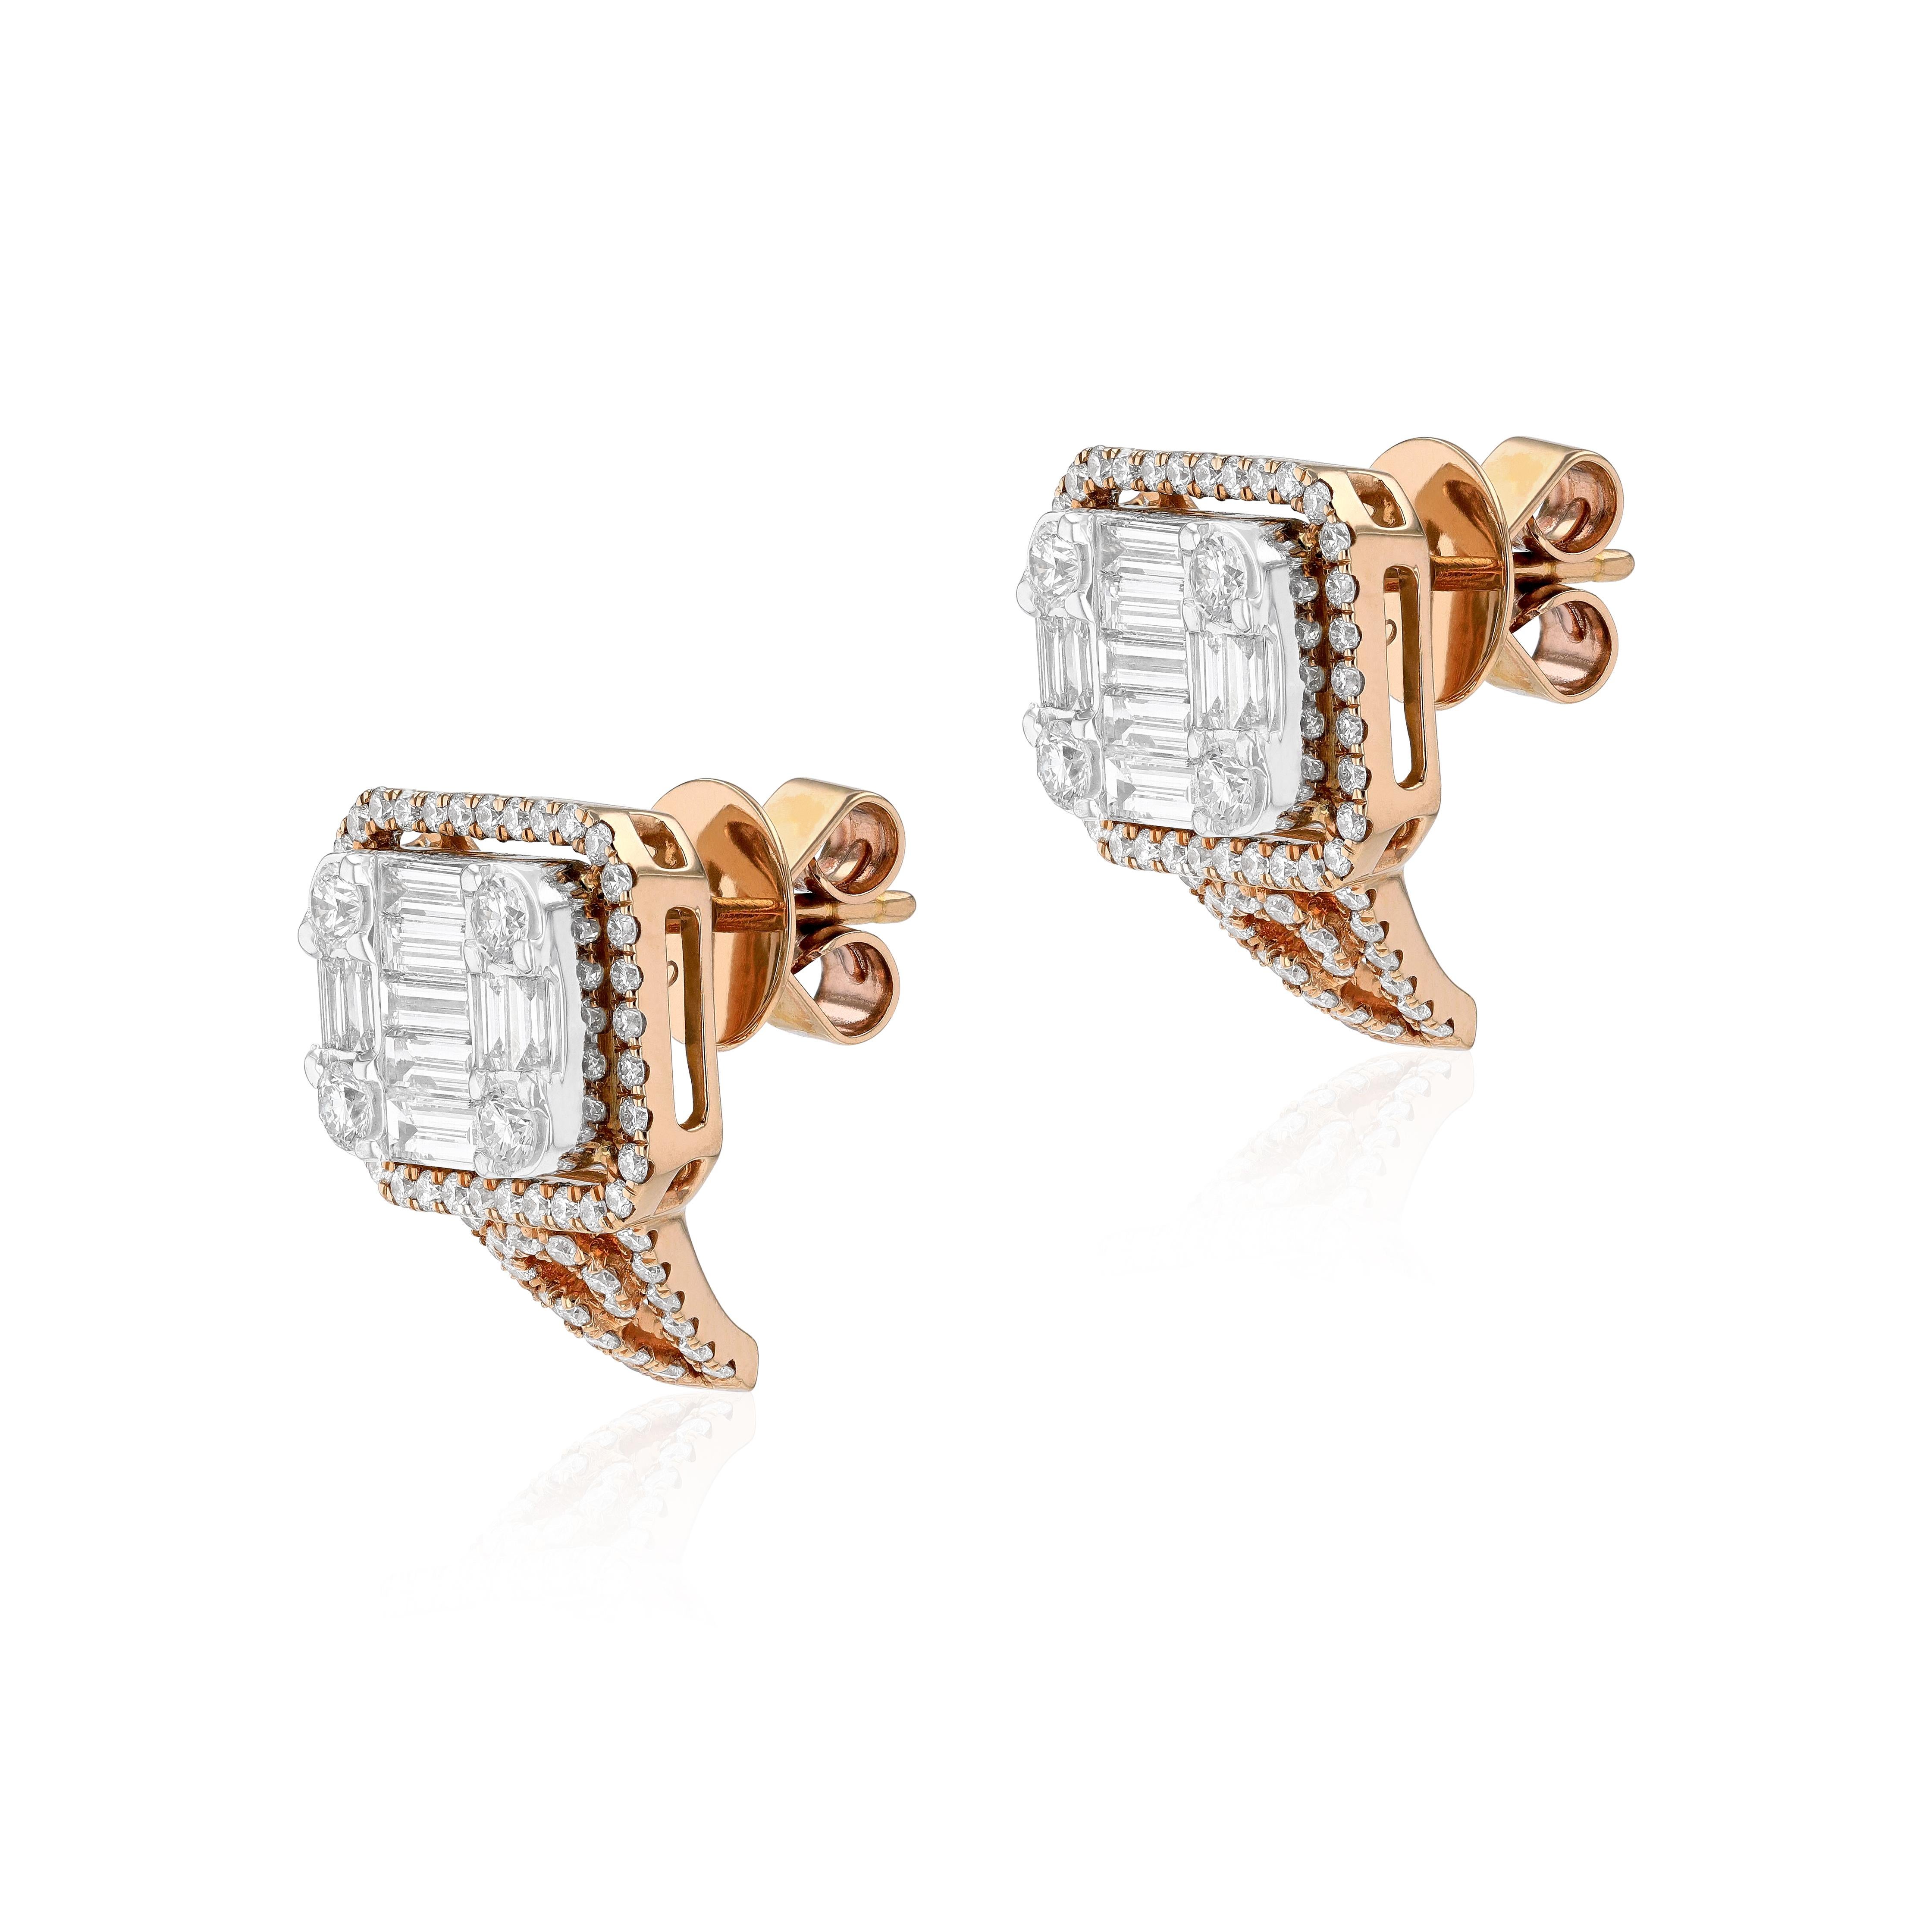 Unique and artistic rose gold 18K earrings by Amwaj jewelry with round and baguette diamonds. This earrings are a signature piece of a nod to refined taste. The center stone surrounded with a diamond halo are adding eye-catching sparkle to this